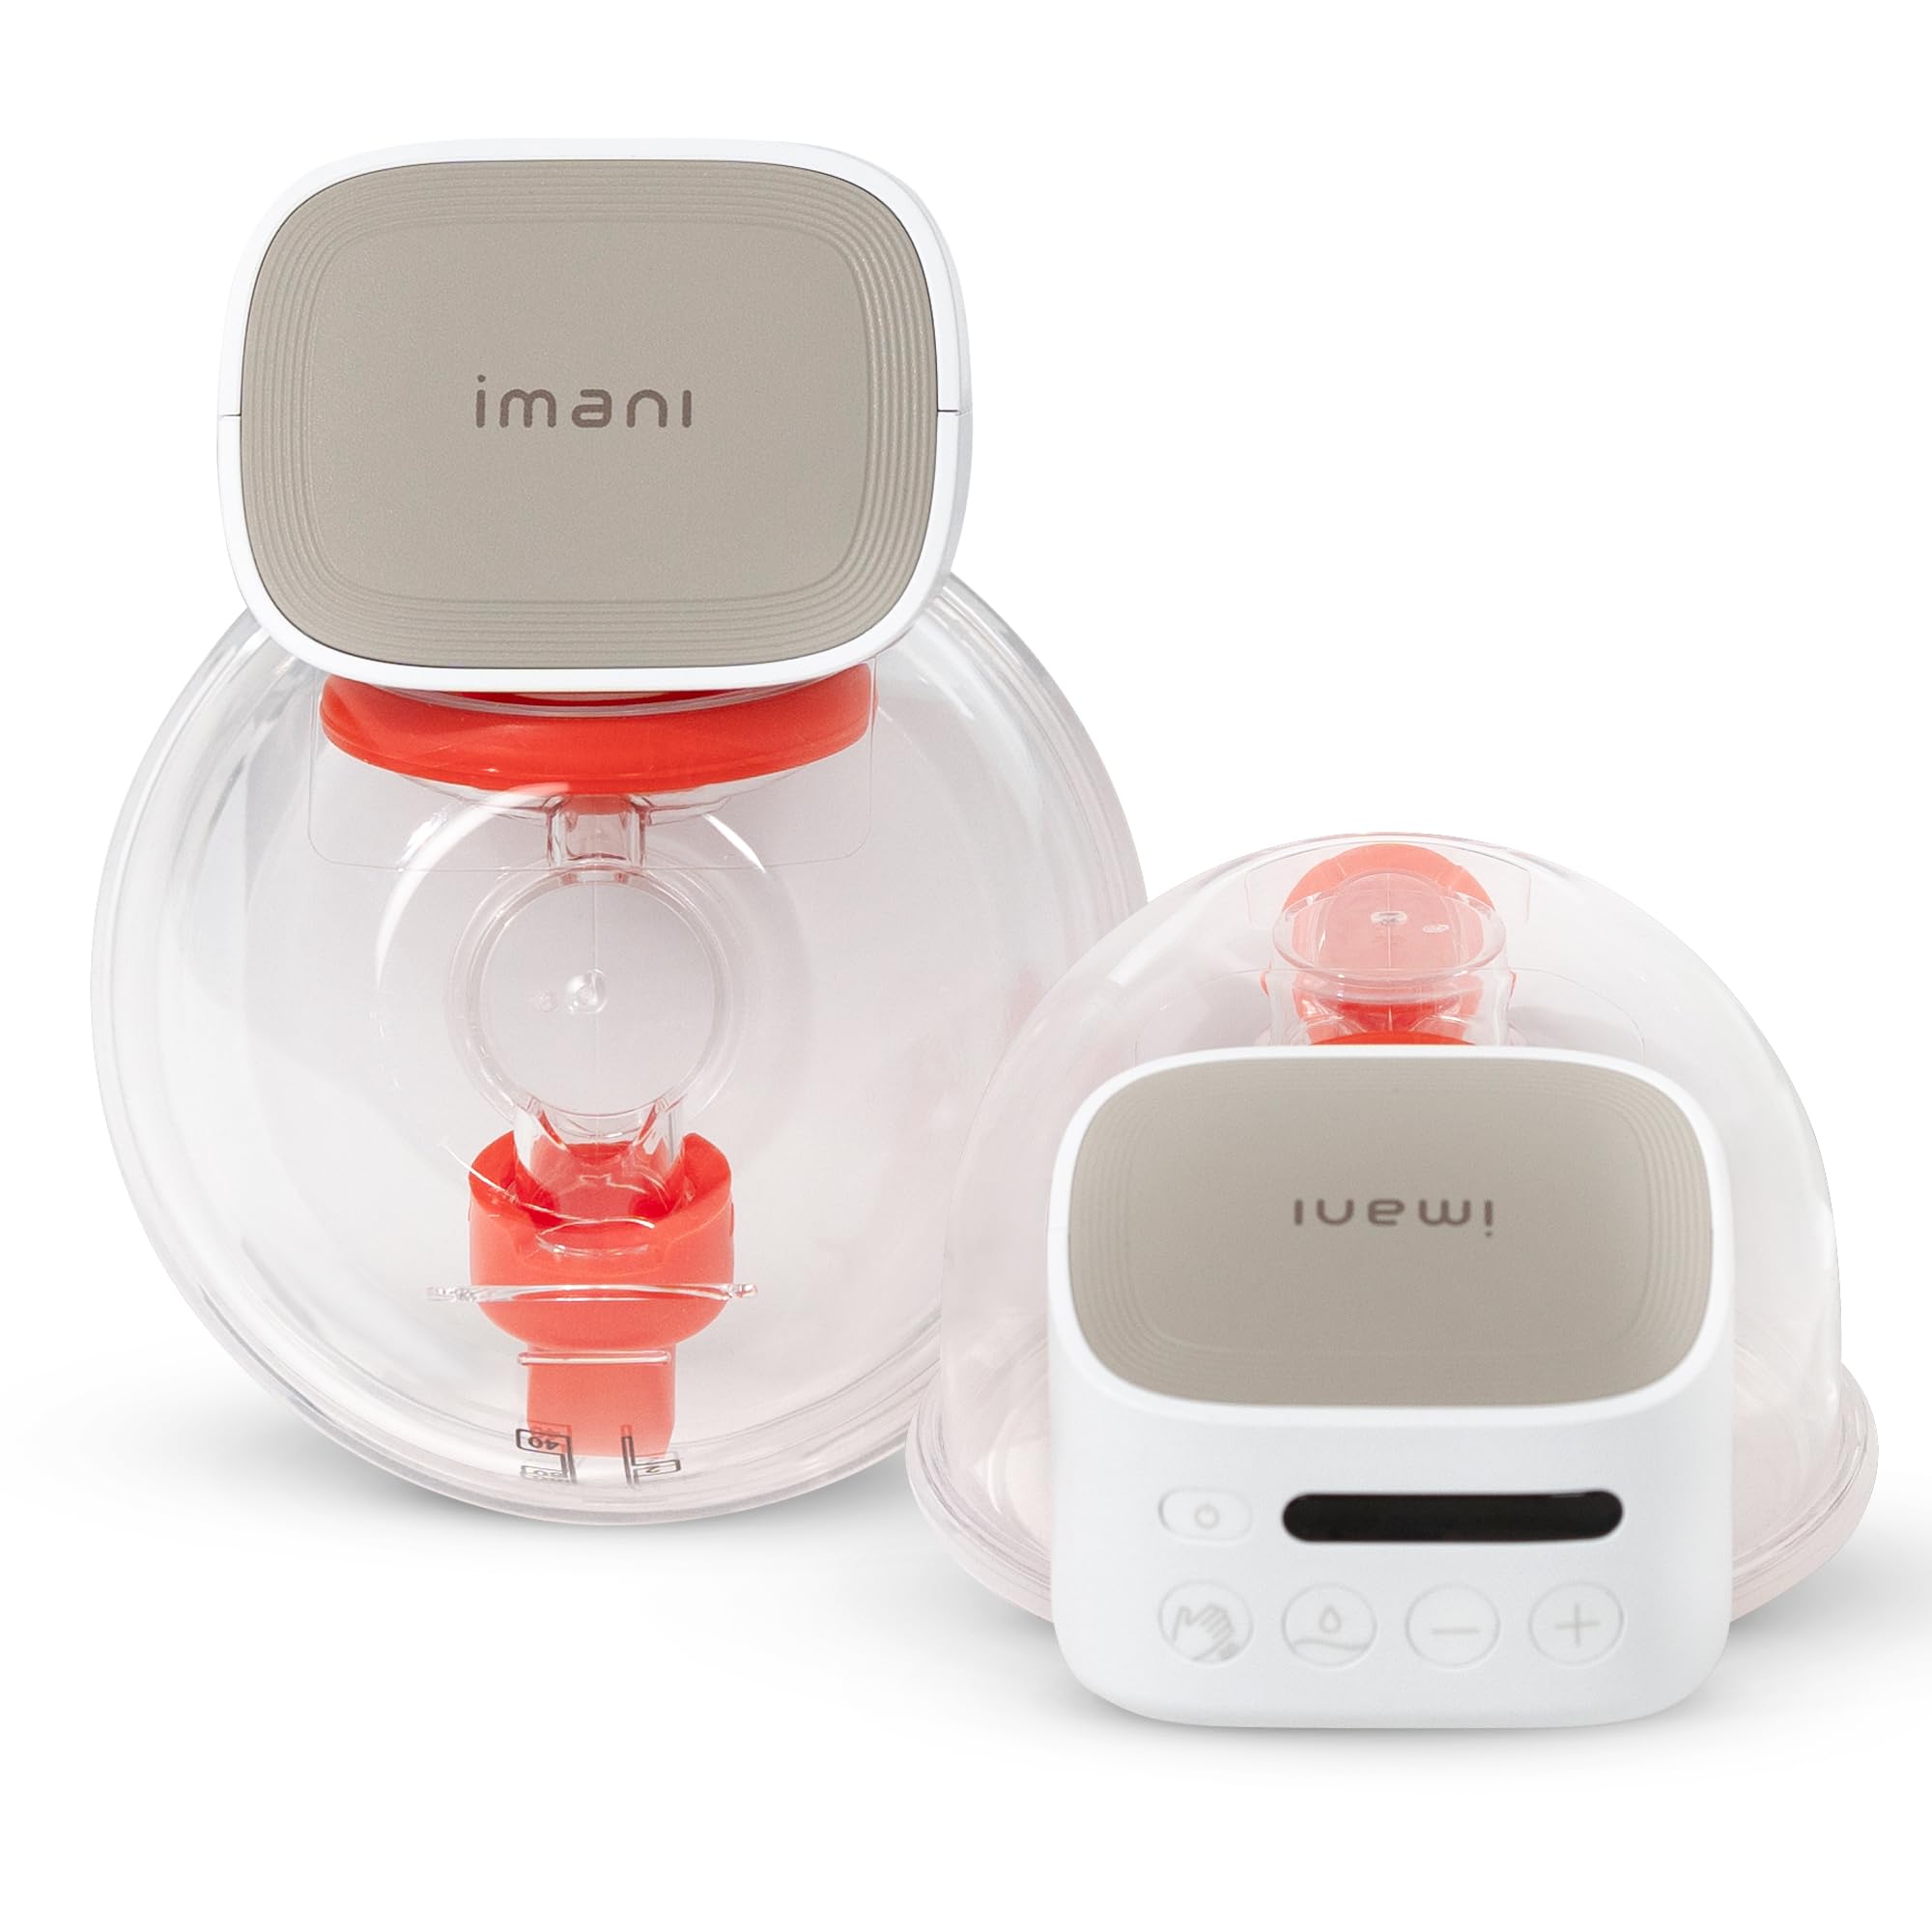 Legendairy Milk Imani i2 Plus Pair of Wearable Electric Breast Pump Hands Free - Cordless, Wireless Complete Duo Kit - 25mm Flange, 21mm Insert and 7oz Capacity - Digital LCD Display - Auto Shut Off